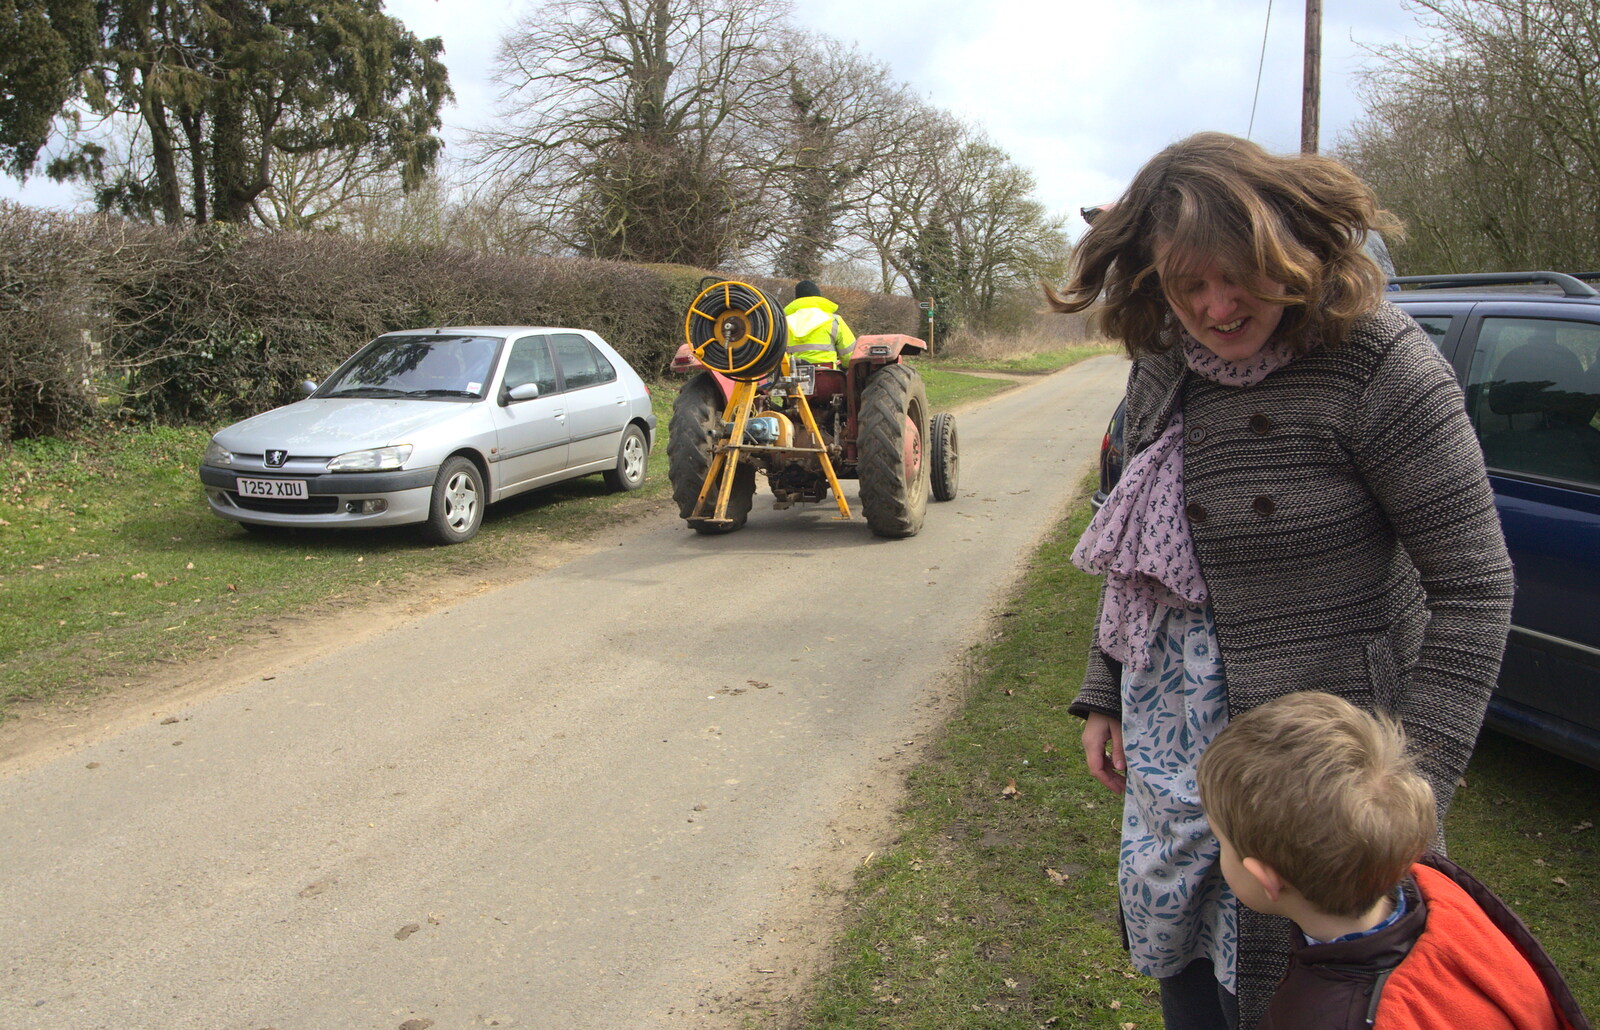 A tractor trundles down the road from An Easter Visit from Da Gorls, Brome, Suffolk - 2nd April 2013